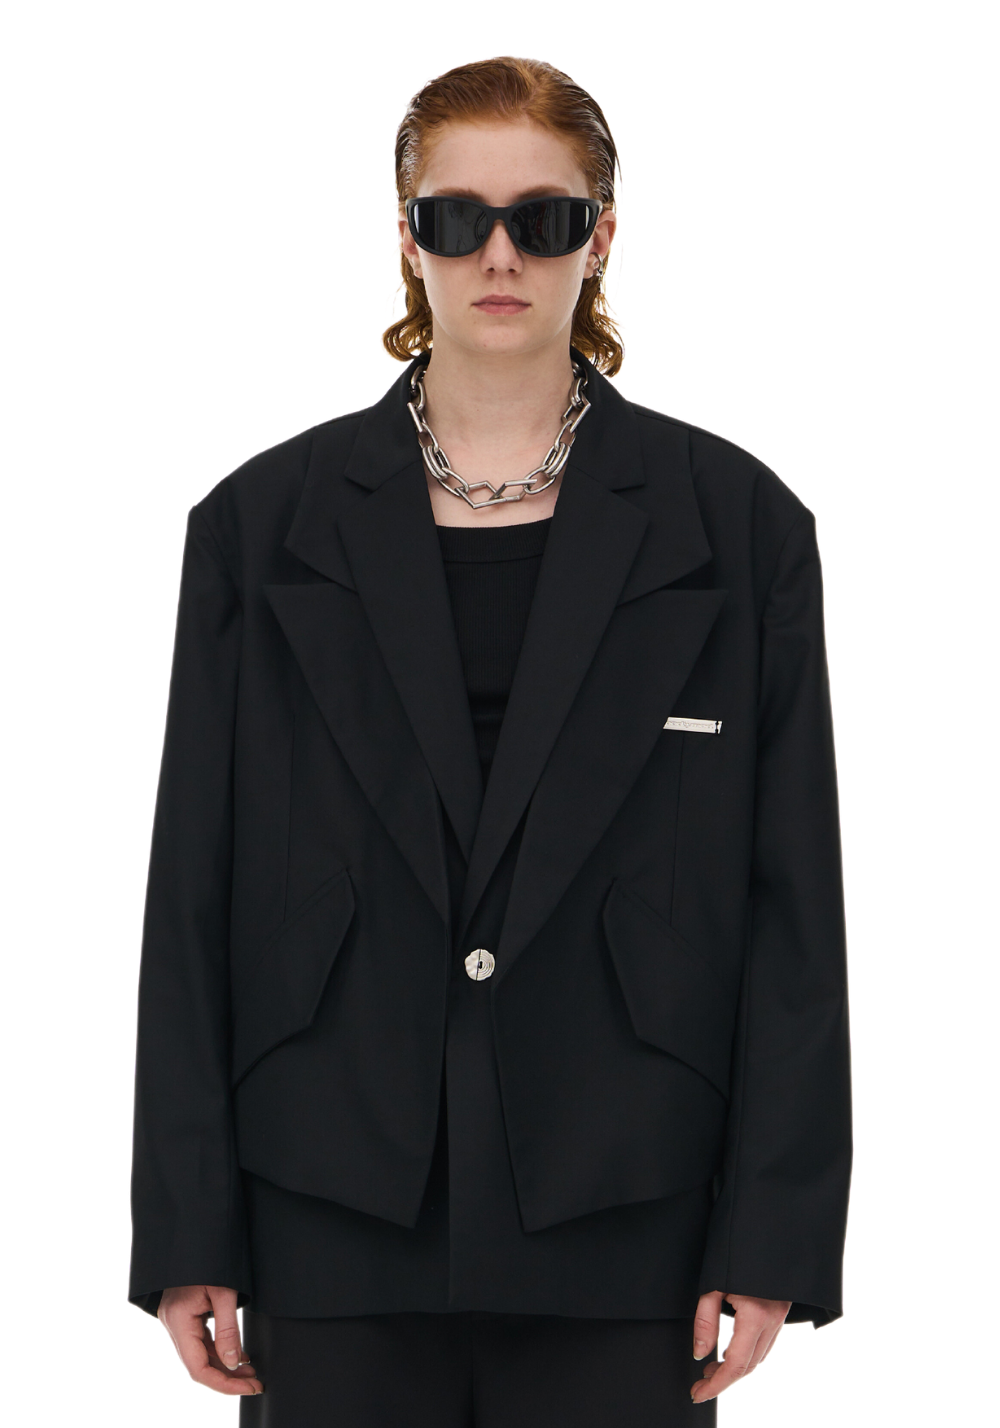 Double Collar Structured Blazer - PSYLOS 1, Double Collar Structured Blazer, Blazer, MODITEC, PSYLOS 1